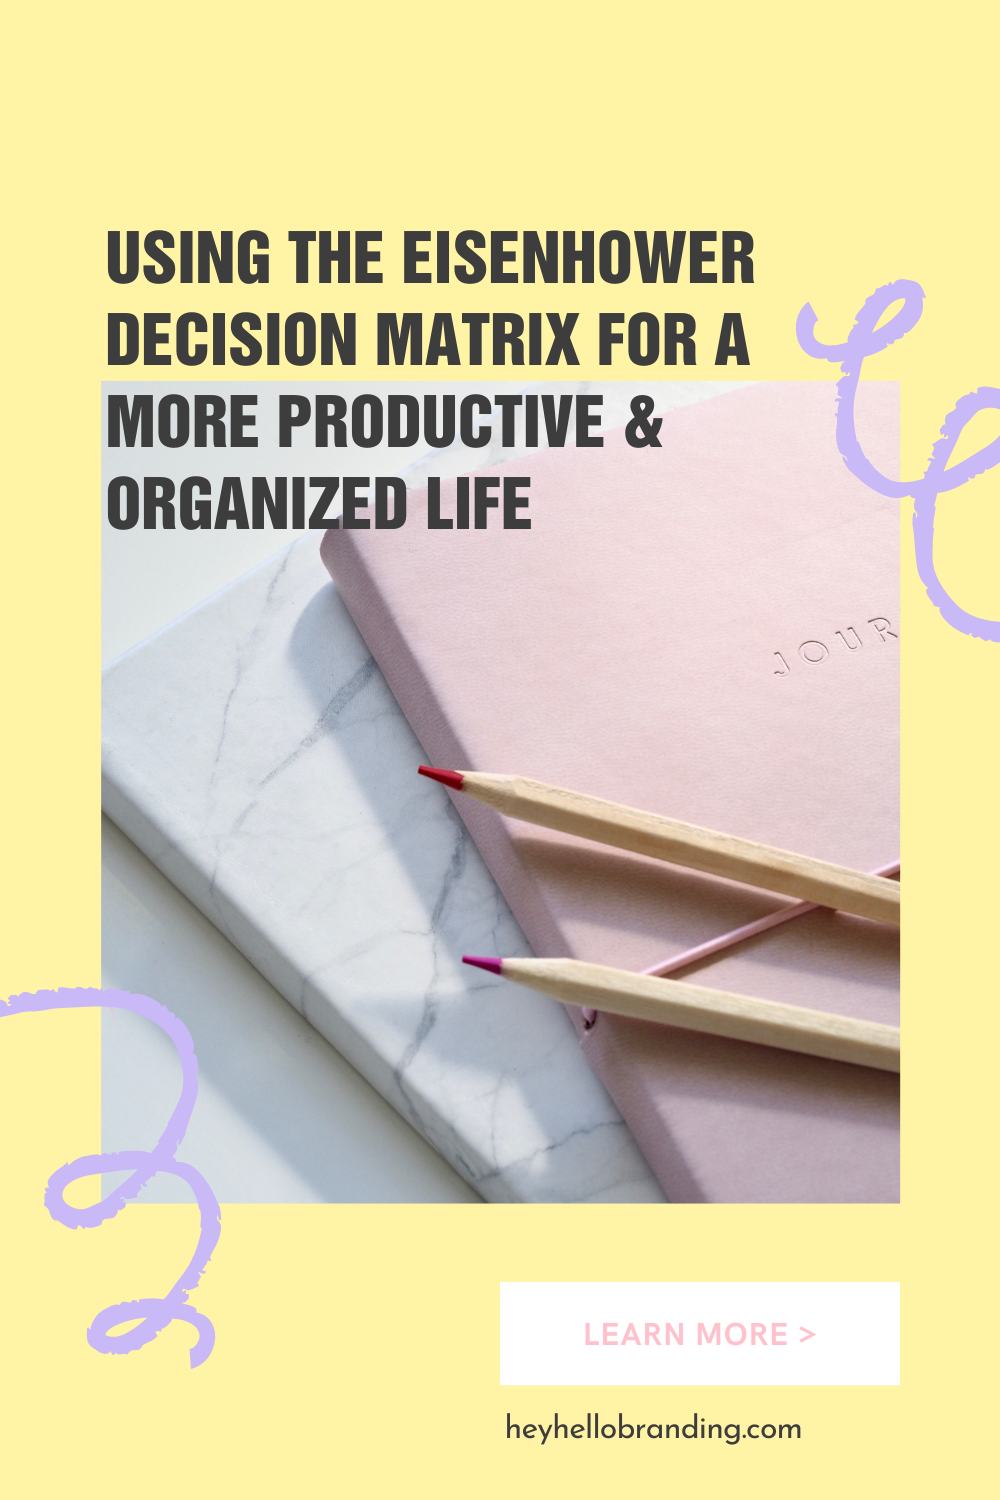 Using The Eisenhower Decision Matrix for a More Productive & Organized Life